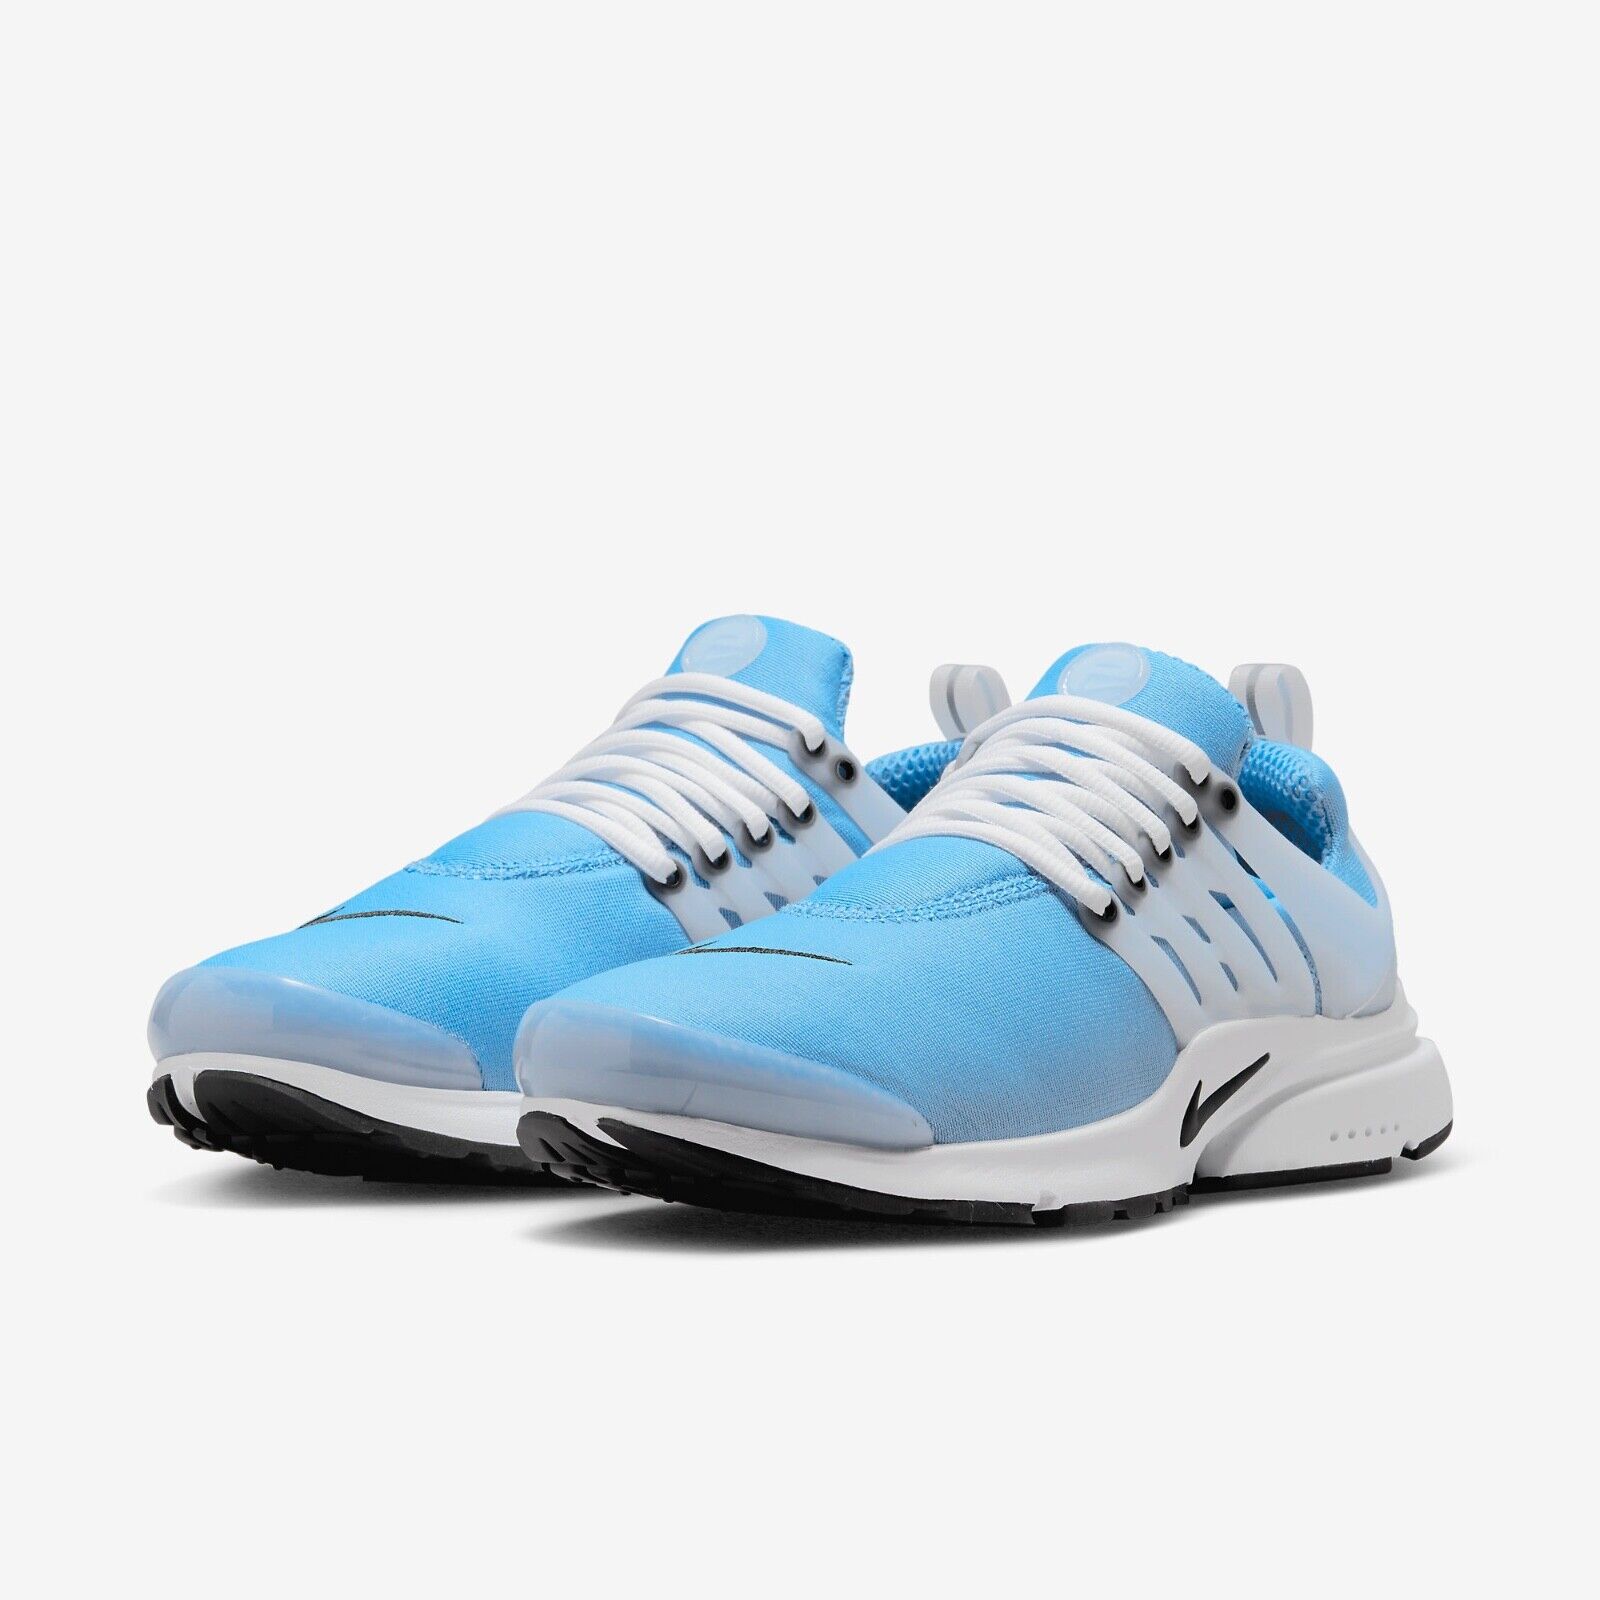 Nike Air Presto Men\'s Casual Shoes ALL COLORS US Sizes 8-13